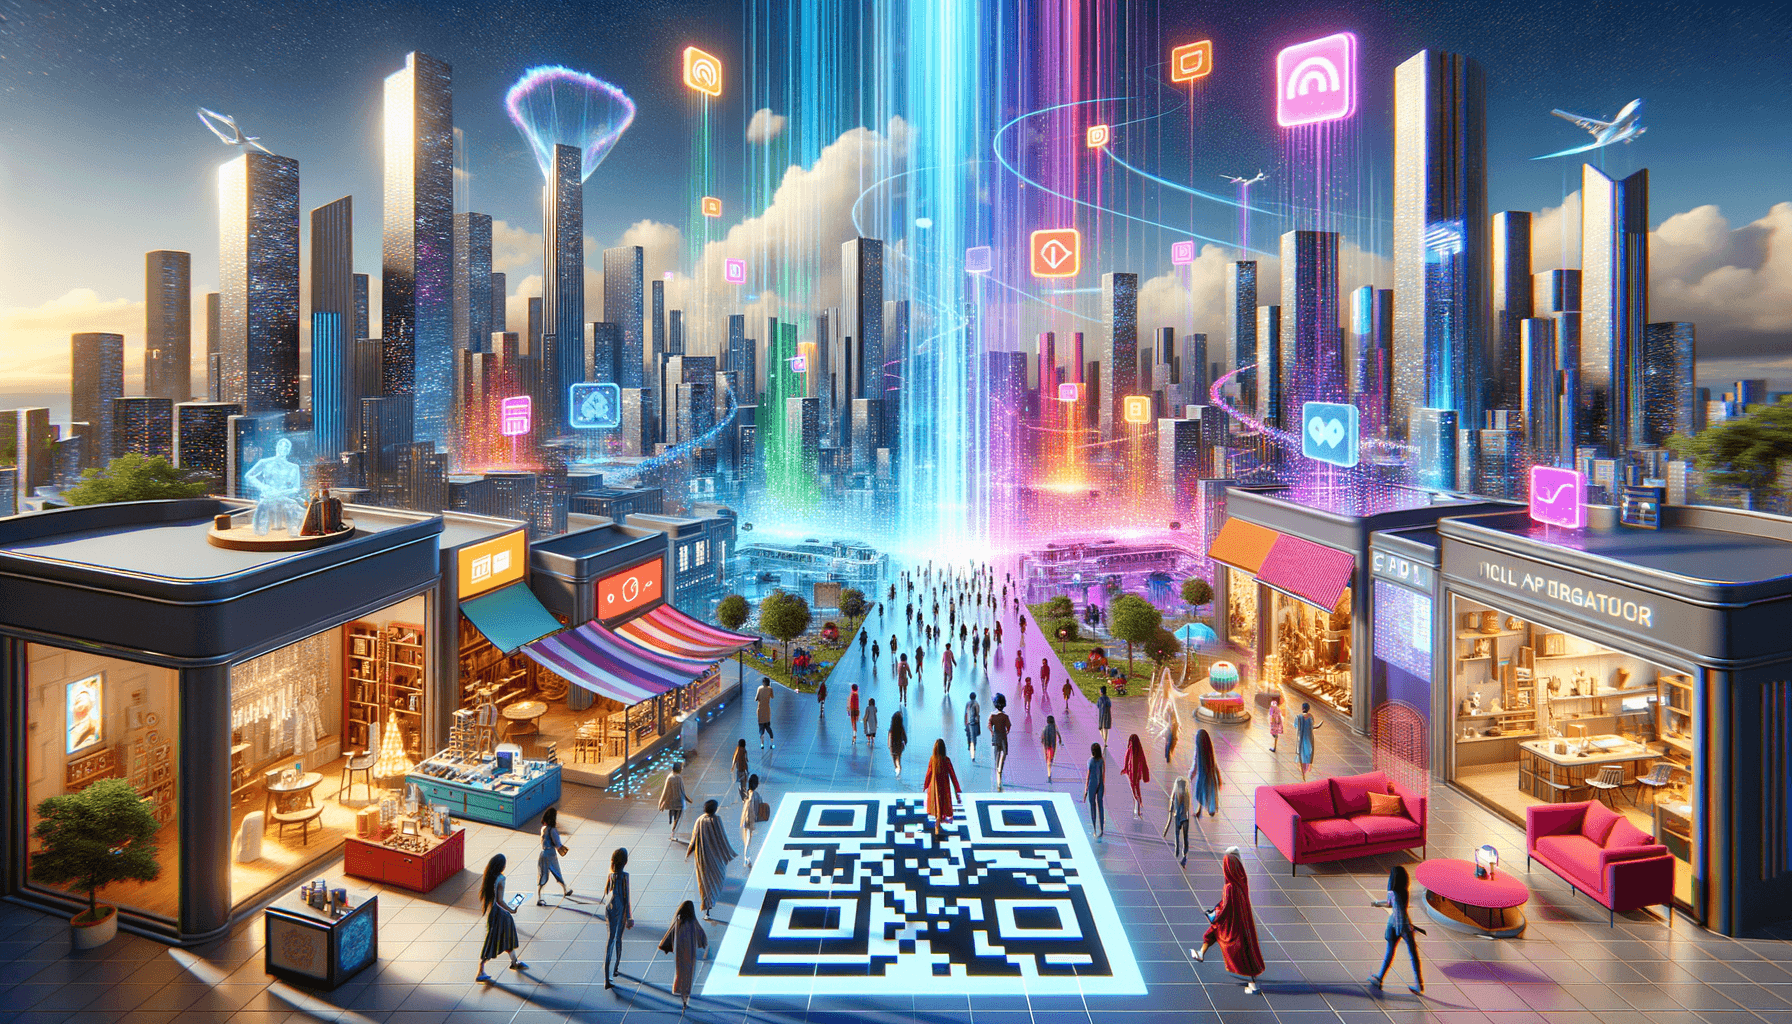 "Experience the future of shopping and storytelling with WebAR – Transformative technology that turns QR codes into immersive gateways for innovative brand experiences. #WebAR #InteractiveMarketing #DigitalTransformation"